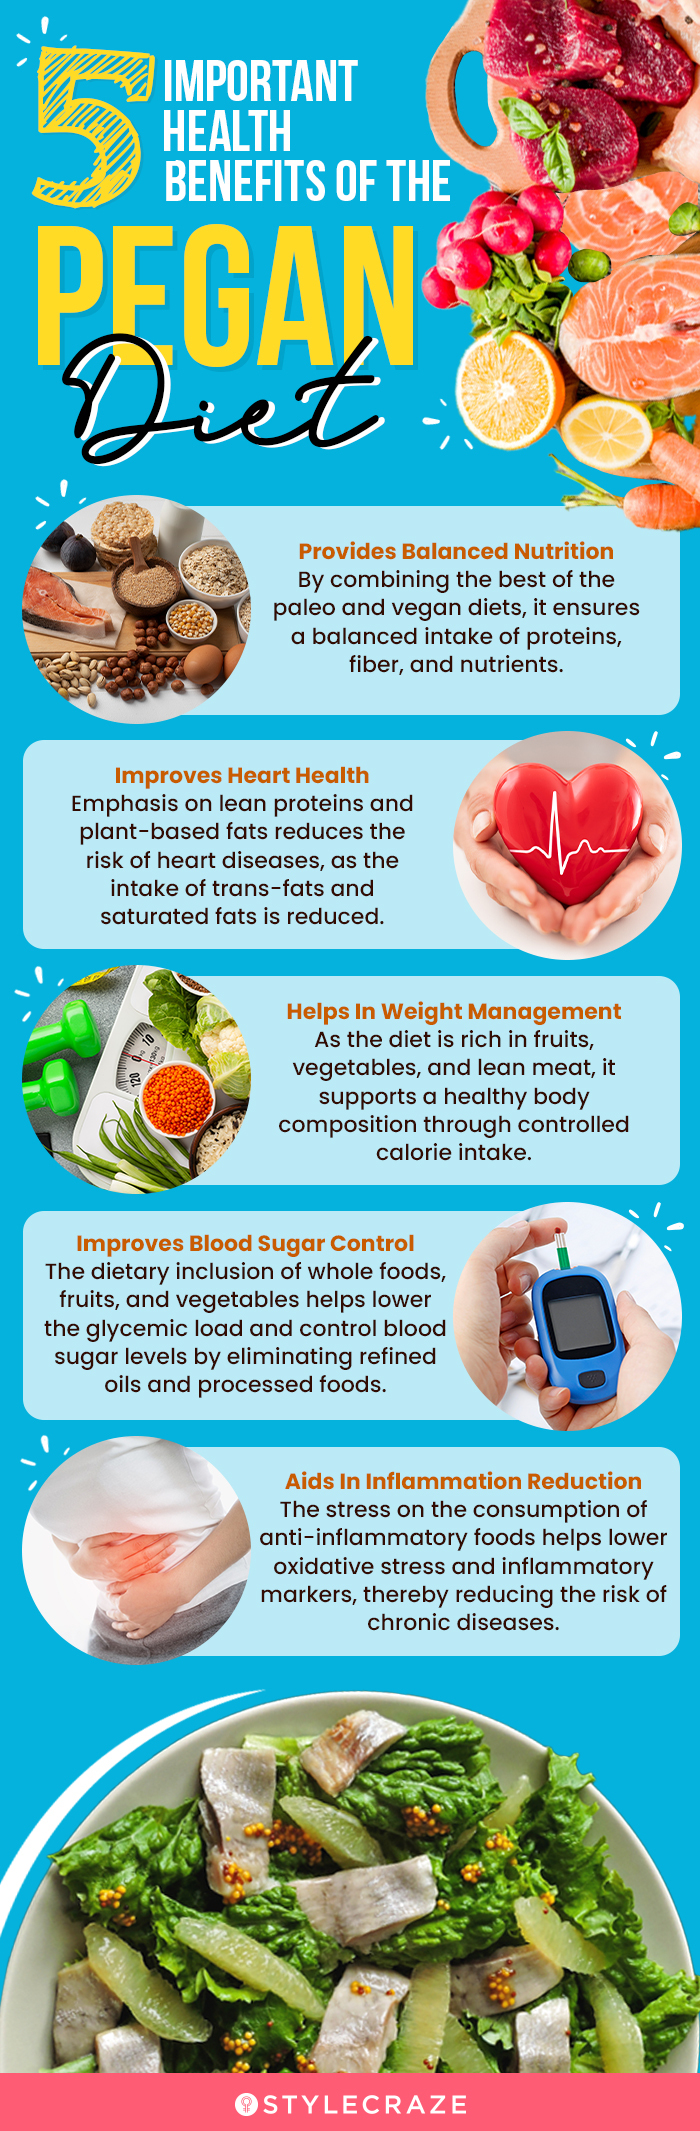 5 important health benefits of pegan diet (infographic)